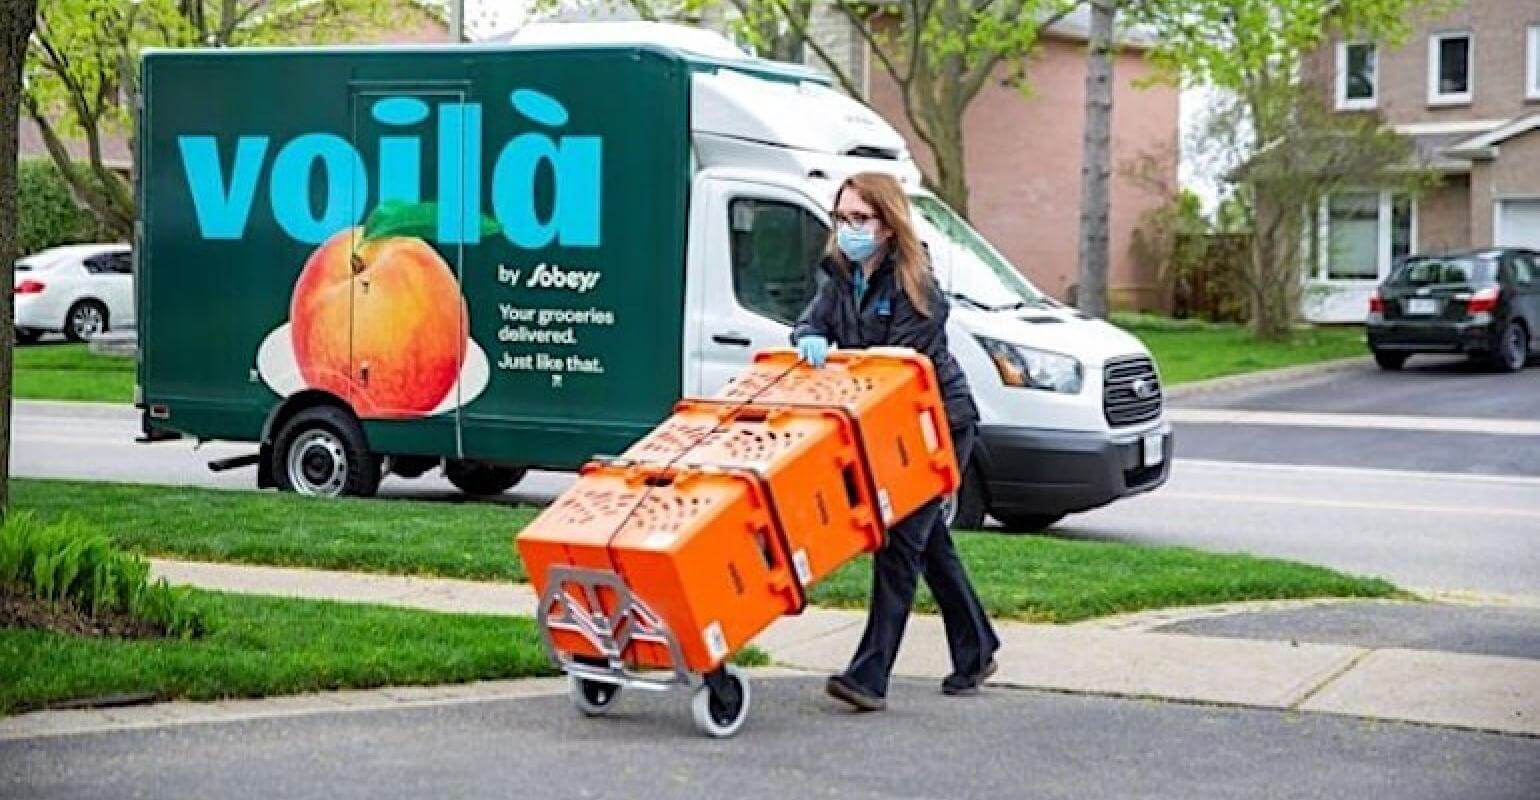 Online grocery delivery in Toronto Voila by Sobeys